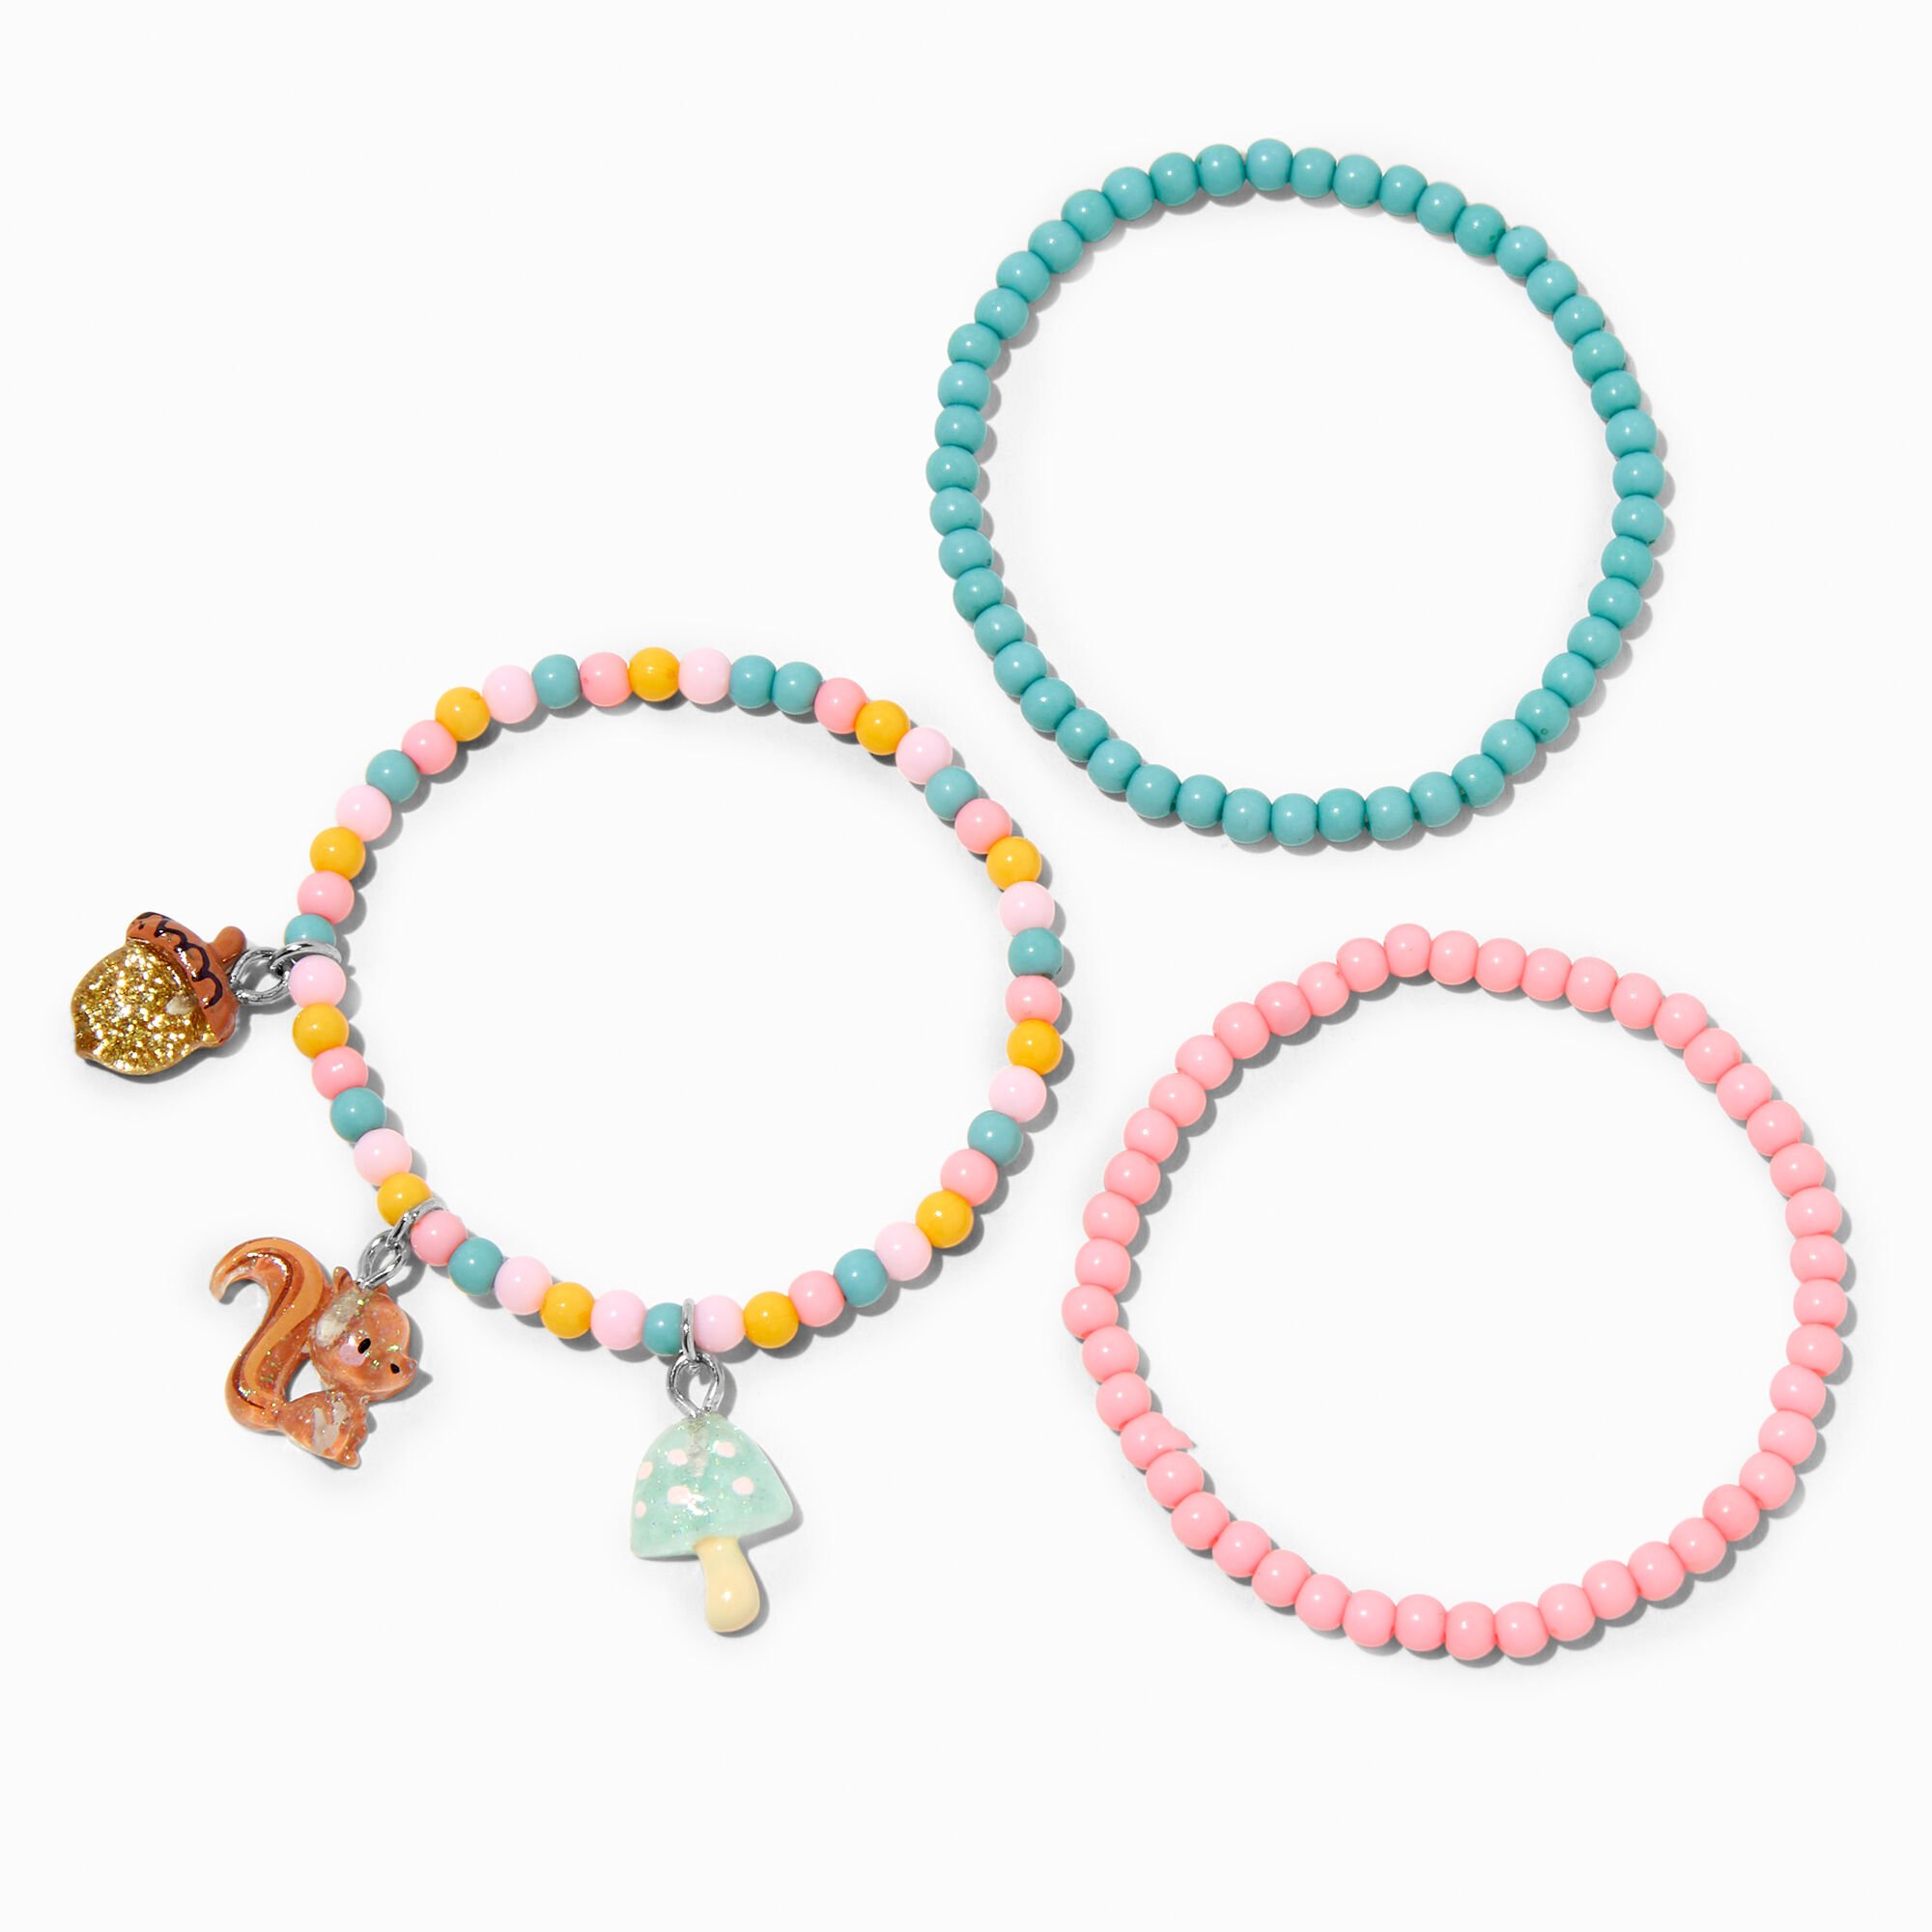 View Claires Club Woodland Critter Seed Bead Stretch Bracelets 3 Pack Rainbow information